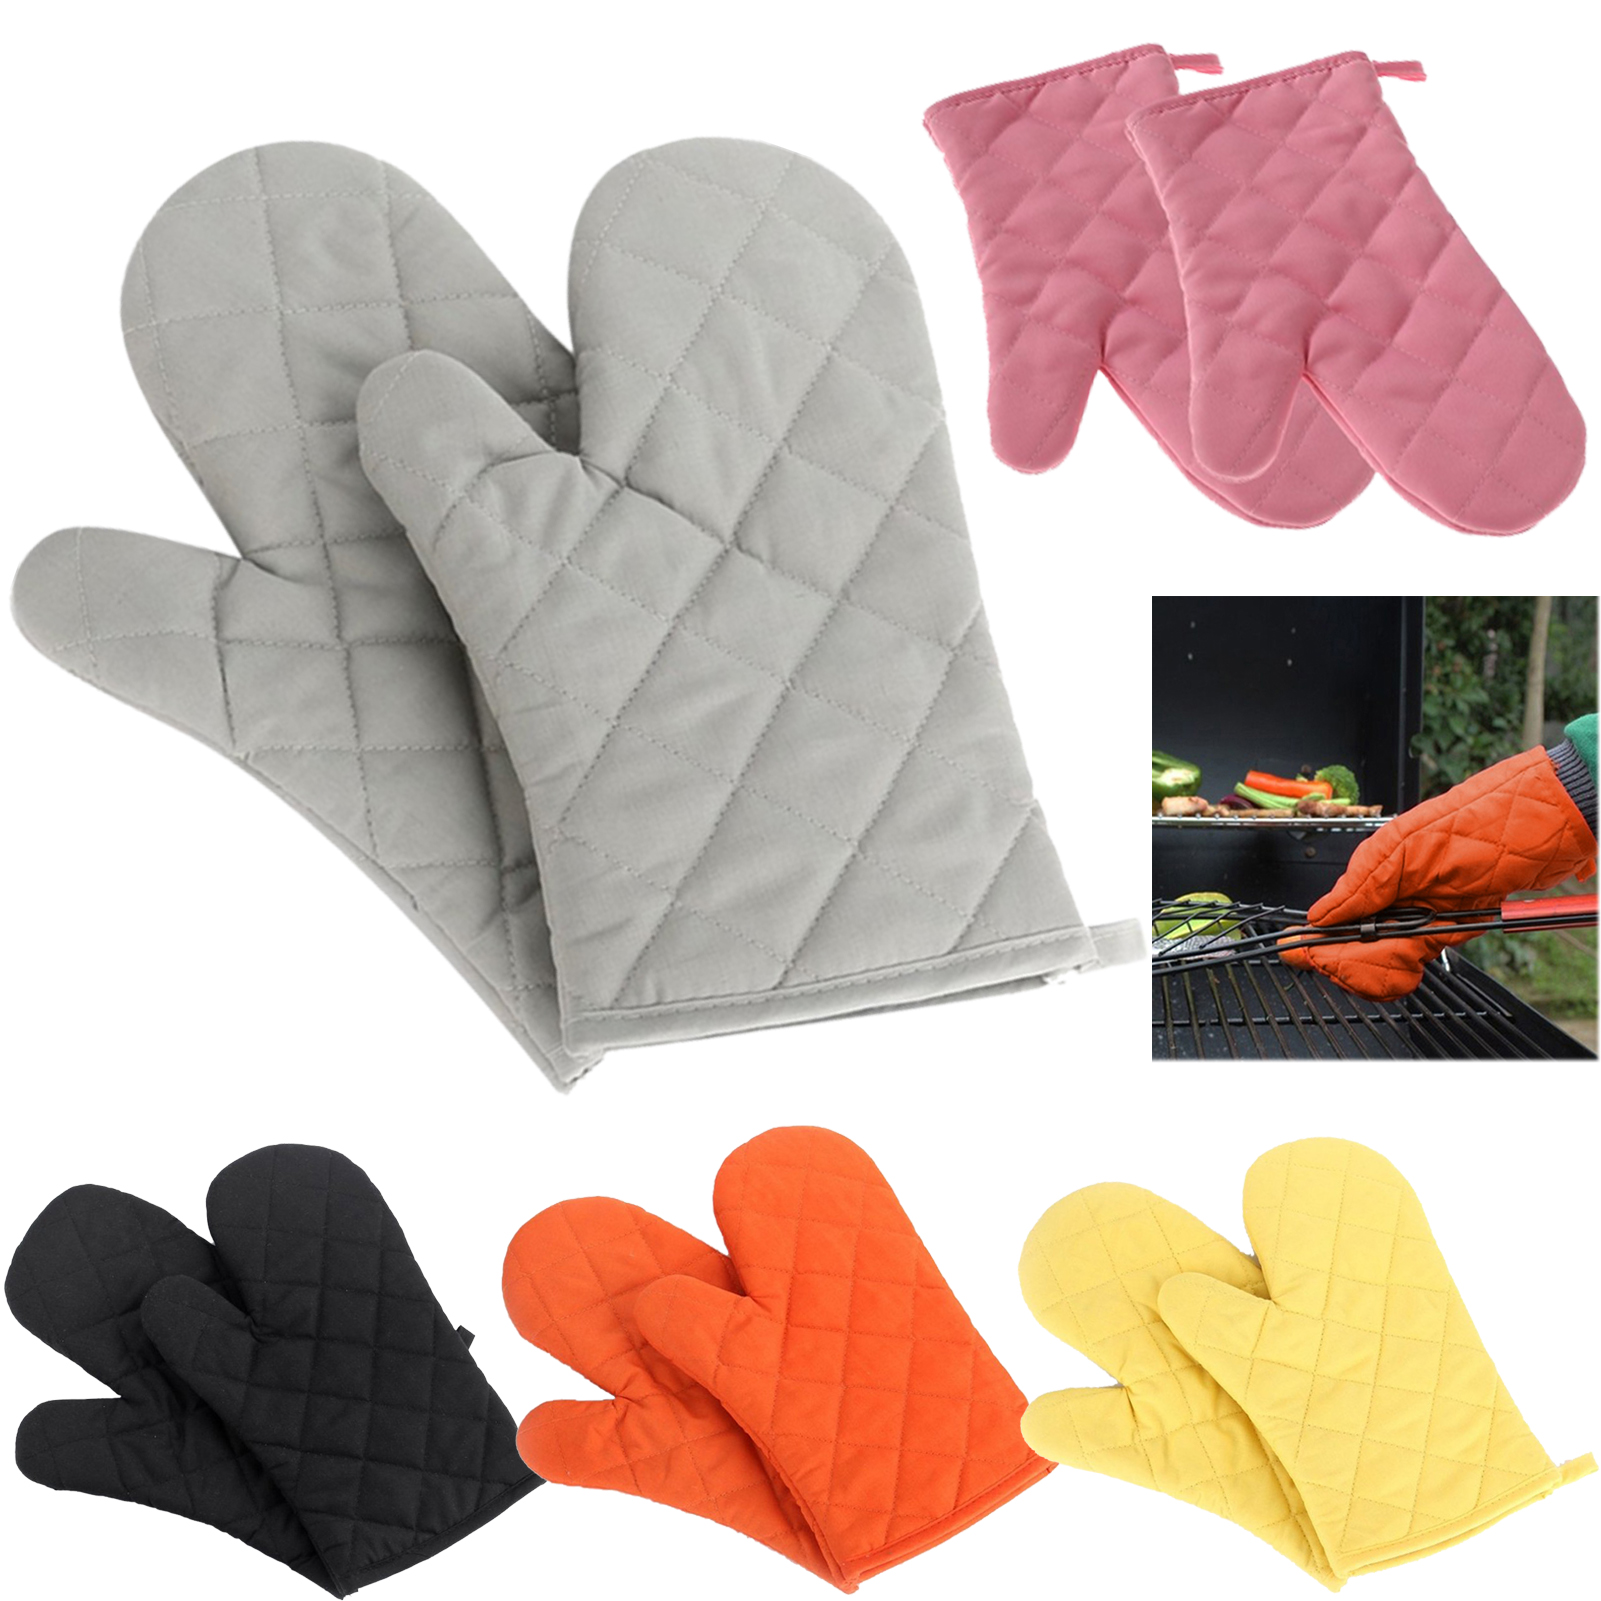 2 Pack Oven Mitts Professional Heat Resistance Kitchen Oven Soft Cotton Gloves for Grilling Cooking Microwave BBQ Baking, with Soft Inner Lining - image 1 of 7